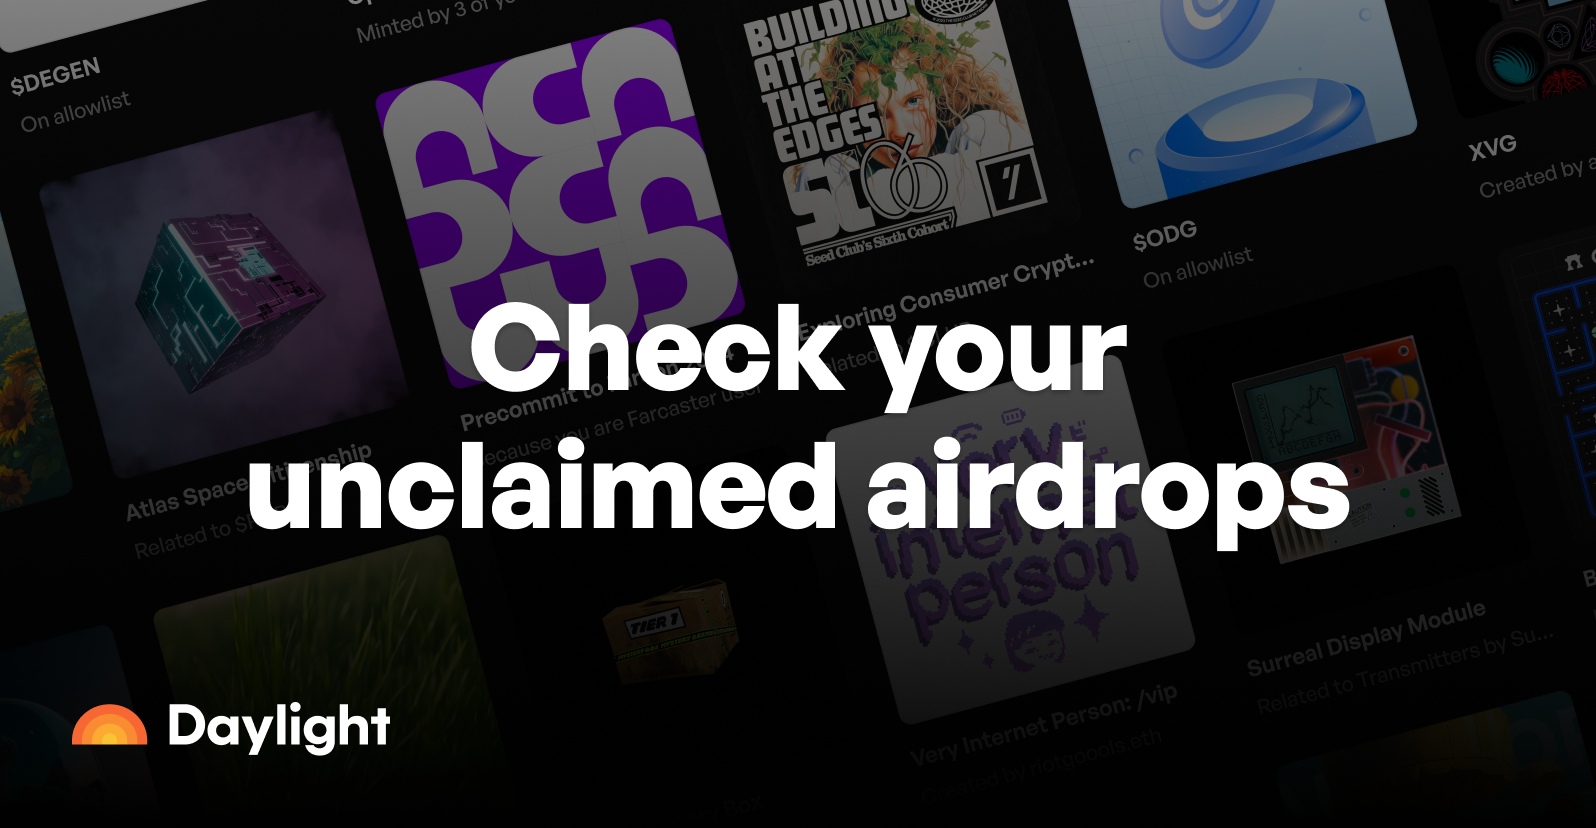 Check your unclaimed airdrops